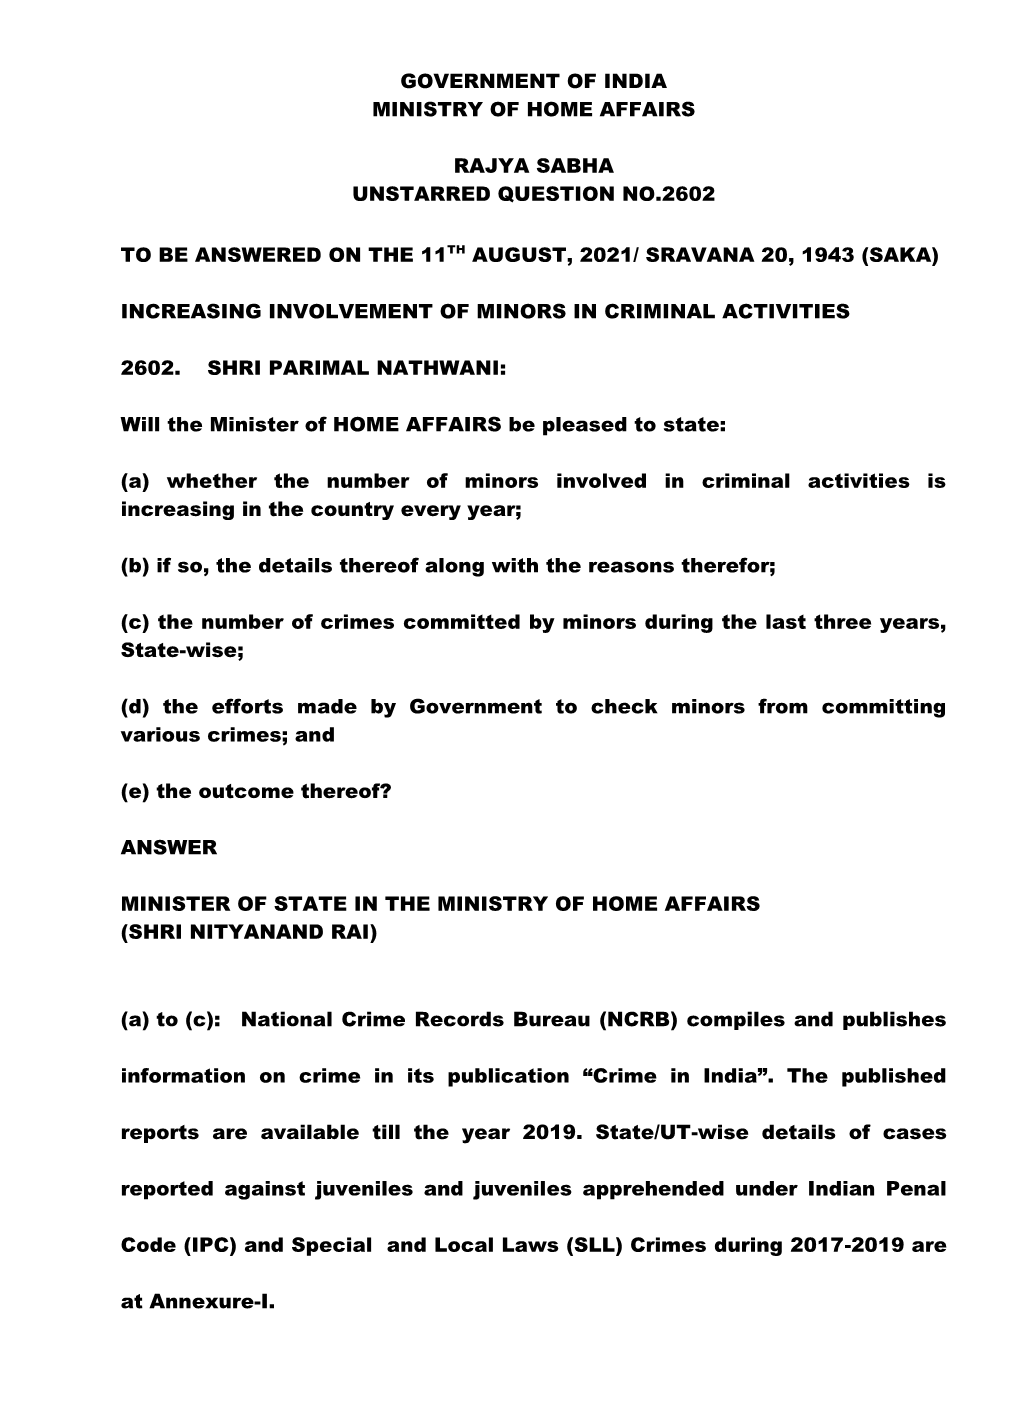 Government of India Ministry of Home Affairs Rajya Sabha Unstarred Question No.2602 to Be Answered on the 11Th August, 2021